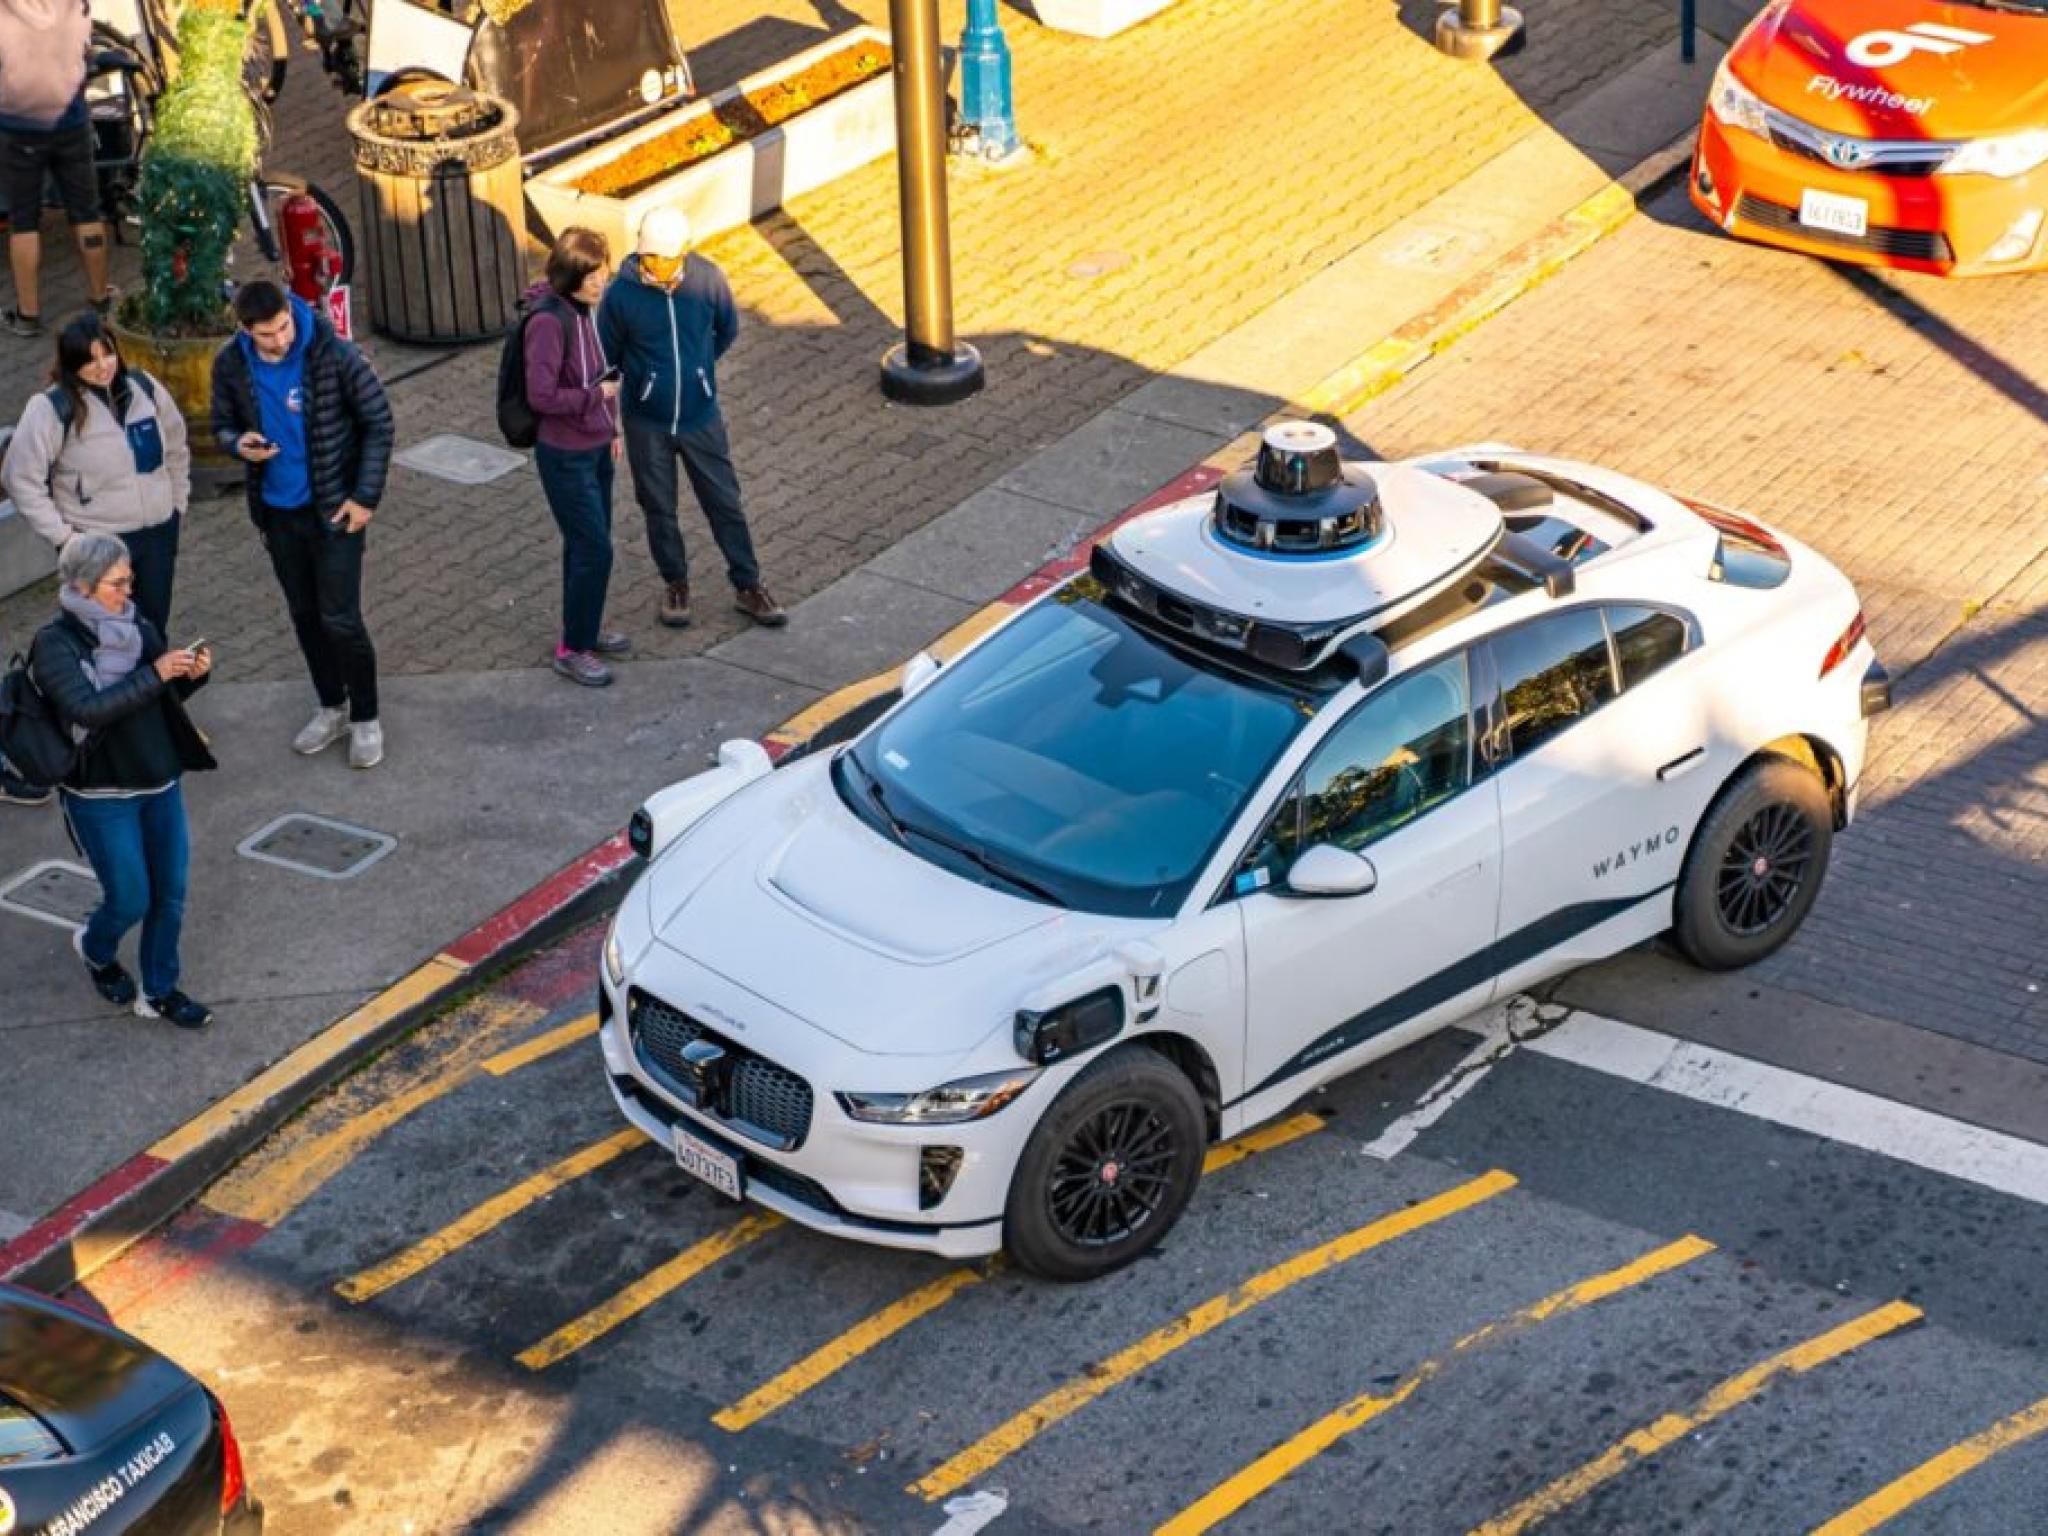  alphabet-unit-waymo-claims-lower-crash-rate-despite-regulator-probes-into-risky-driving-behavior-this-is-why-we-do-it 